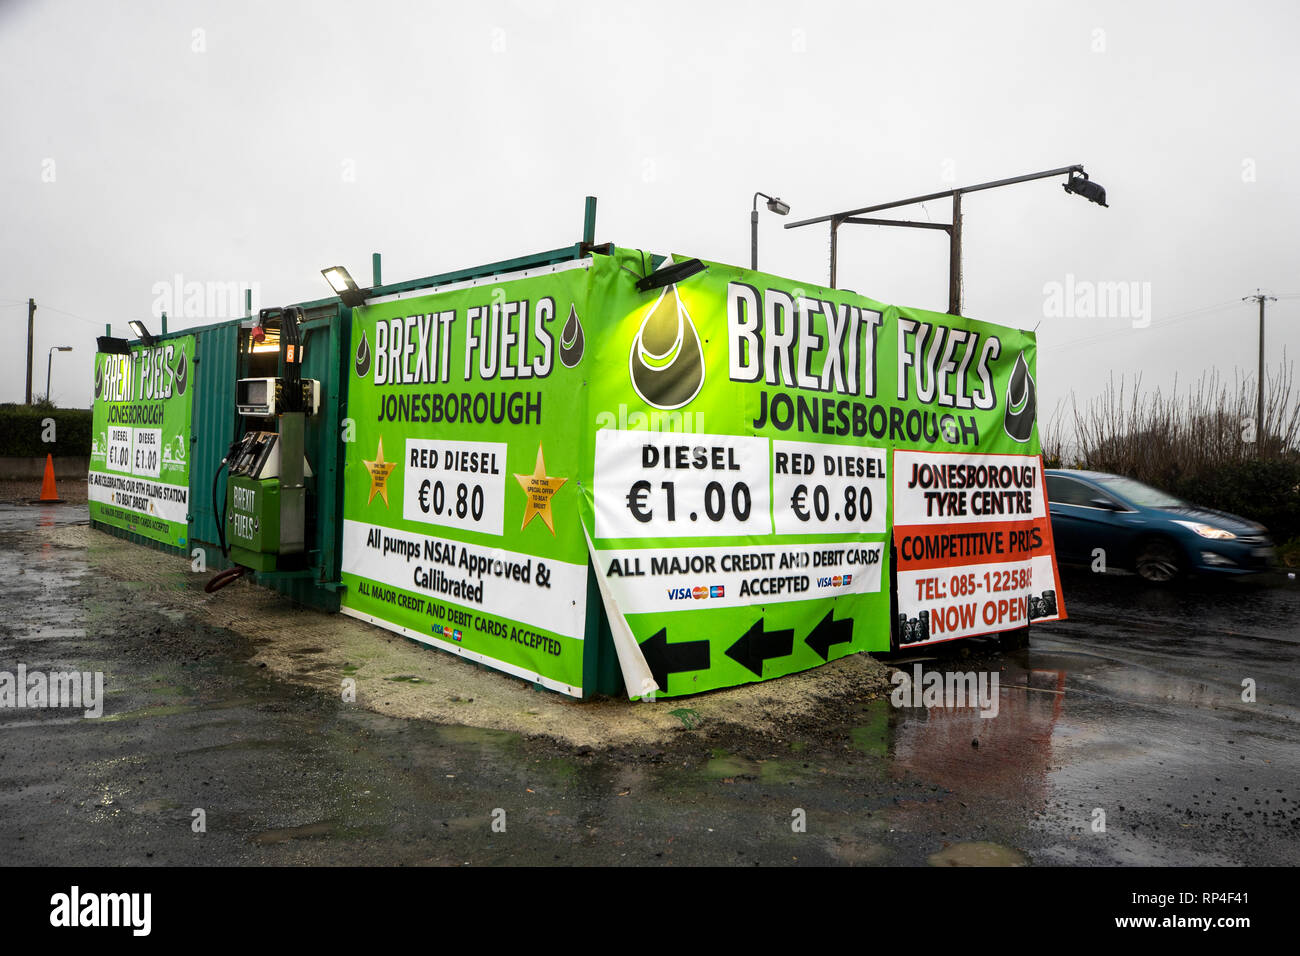 A filling station called Brexit Fuels at Jonesborough in.County Armagh, Northern Ireland, close to the border with the Republic of Ireland. Discussions are continuing between the UK government and the EU over the controversial backstop on the border, which would keep an open border on the island of Ireland in the event that the UK leaves the EU, regardless of the result of the negotiations about their future relationship. Stock Photo